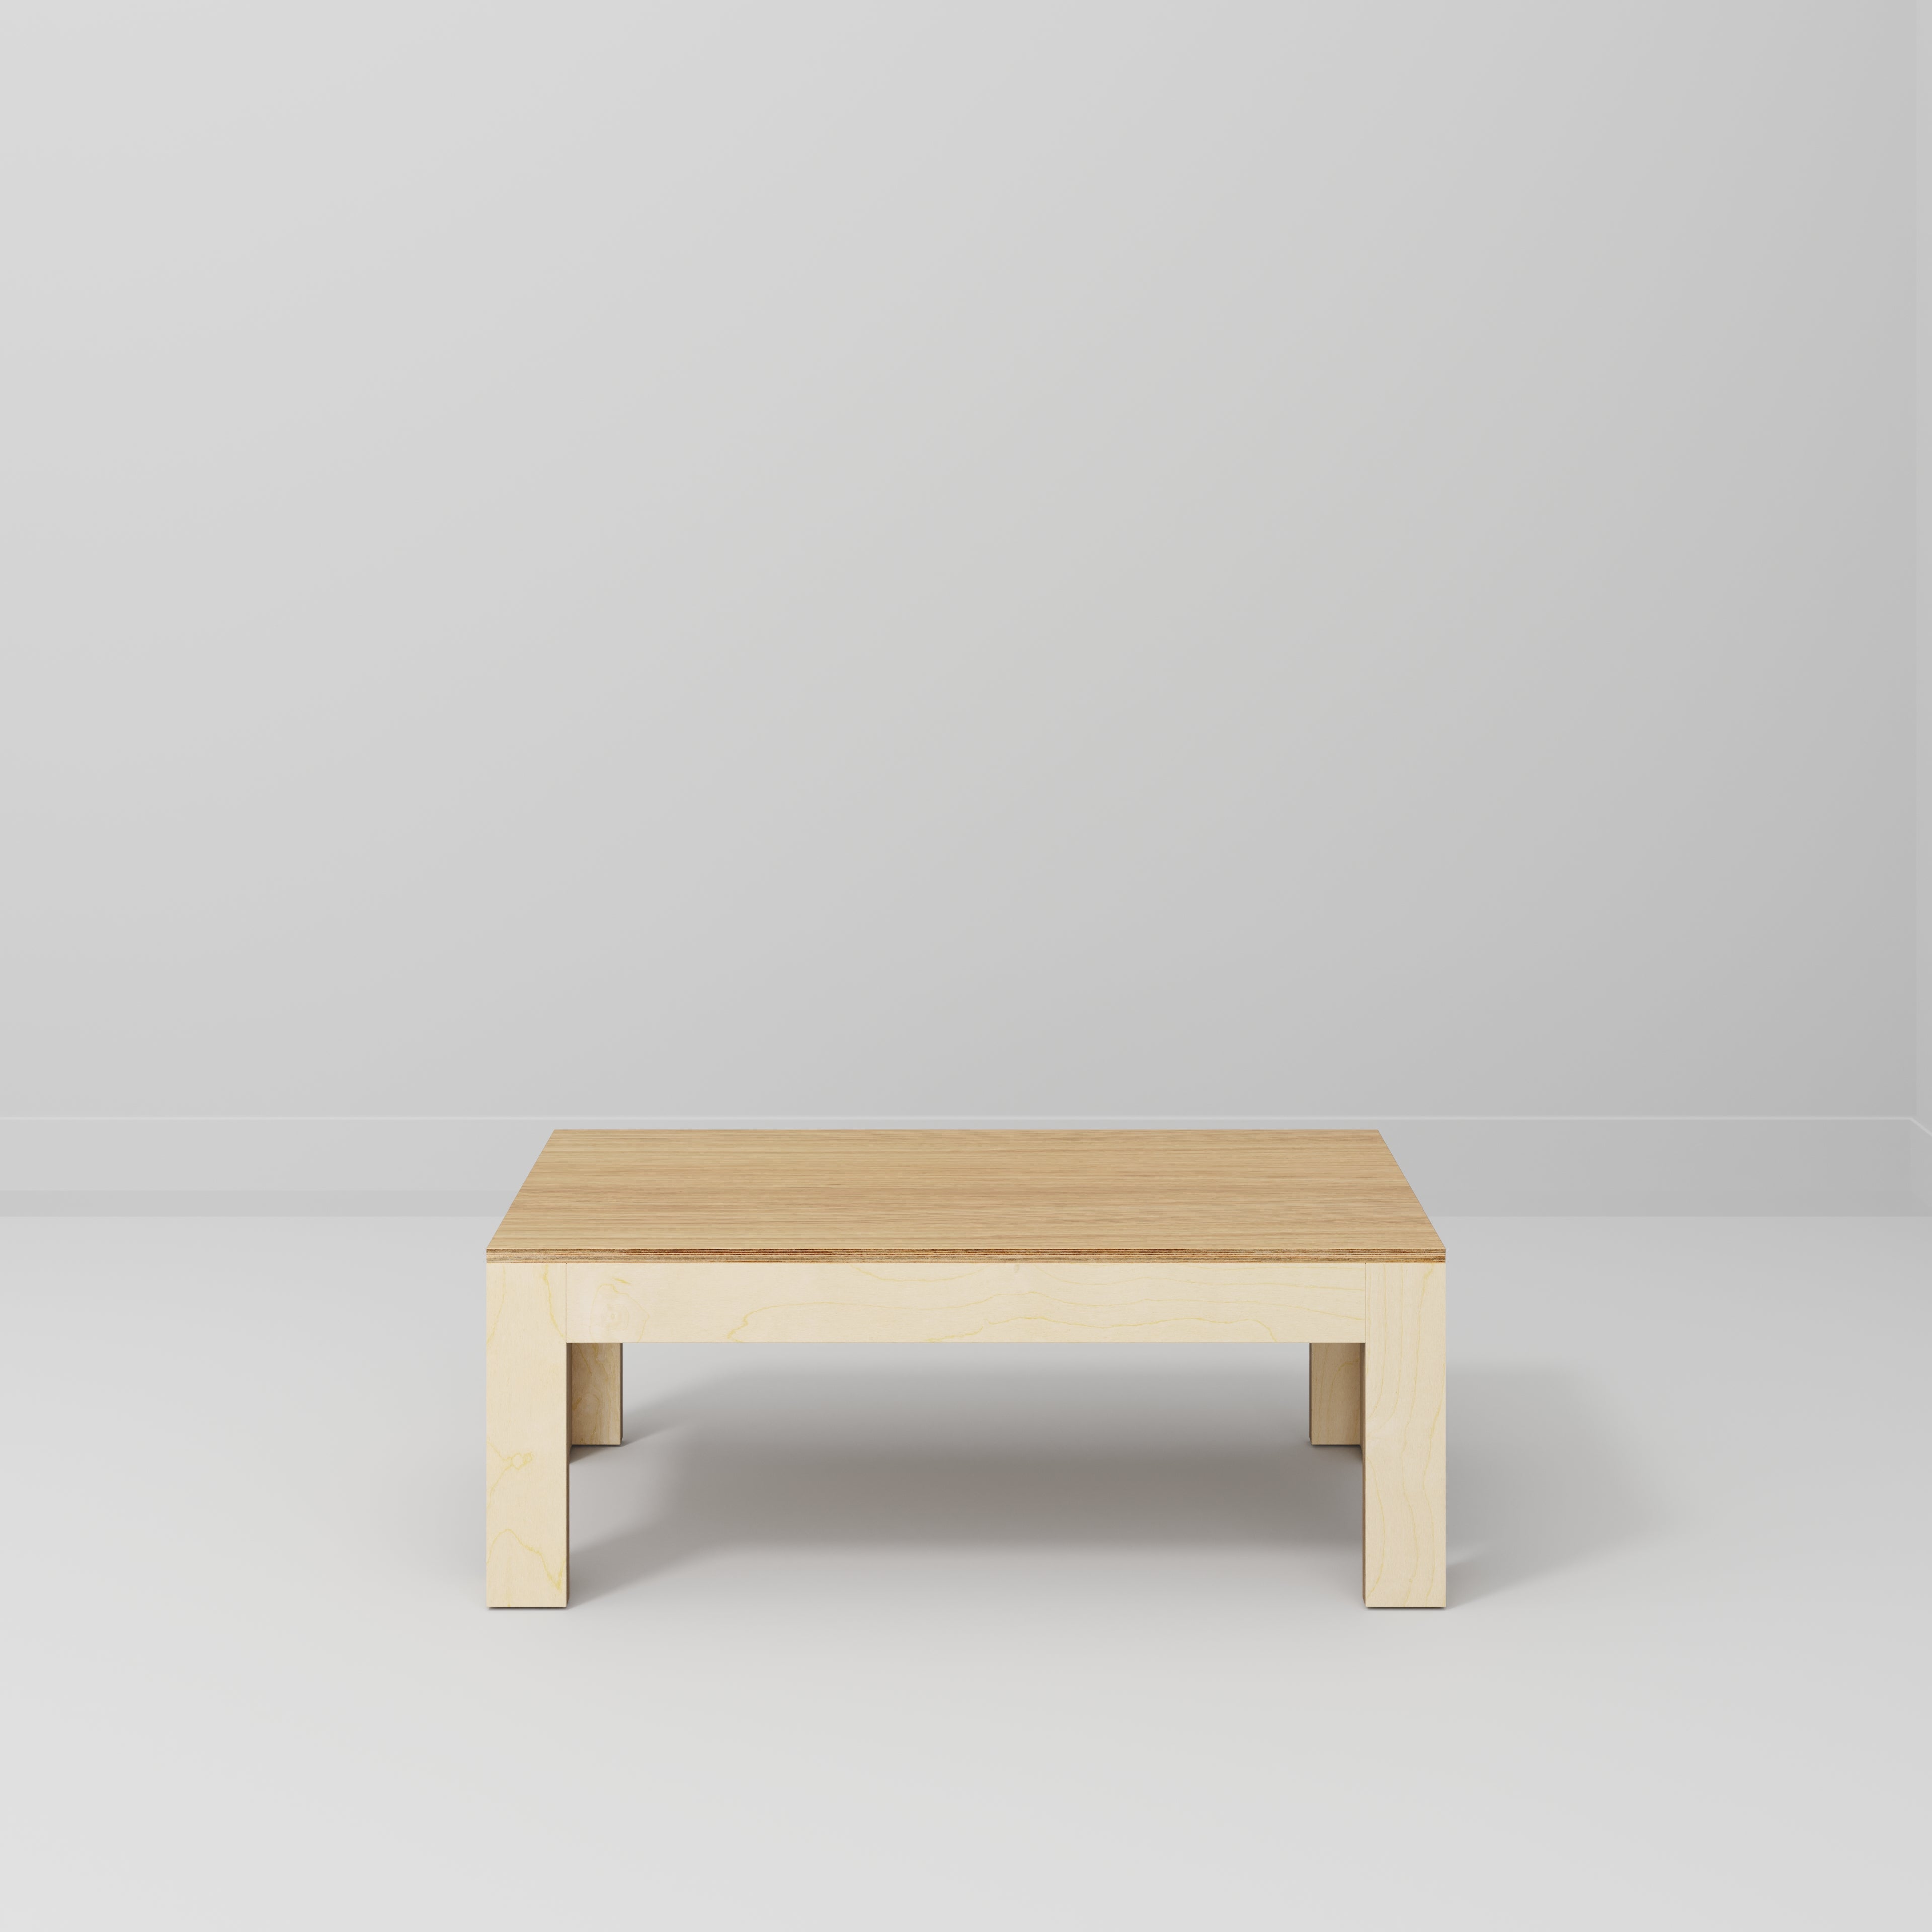 Coffee Table with Solid Frame - Plywood Oak - 1200(w) x 600(d) x 450(h)